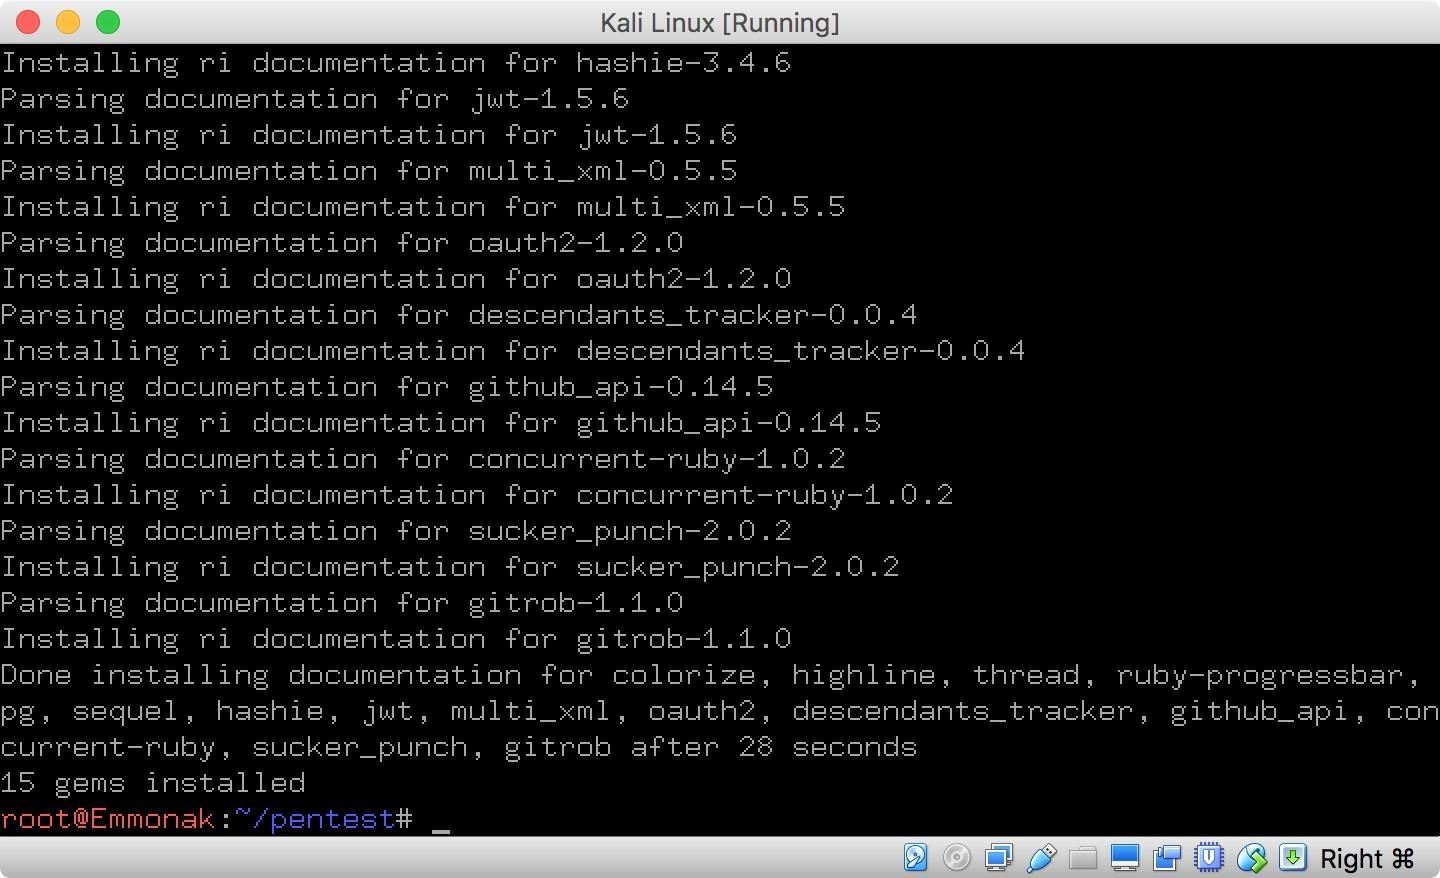 How to Install Gitrob on Kali Linux to Mine GitHub for Credentials